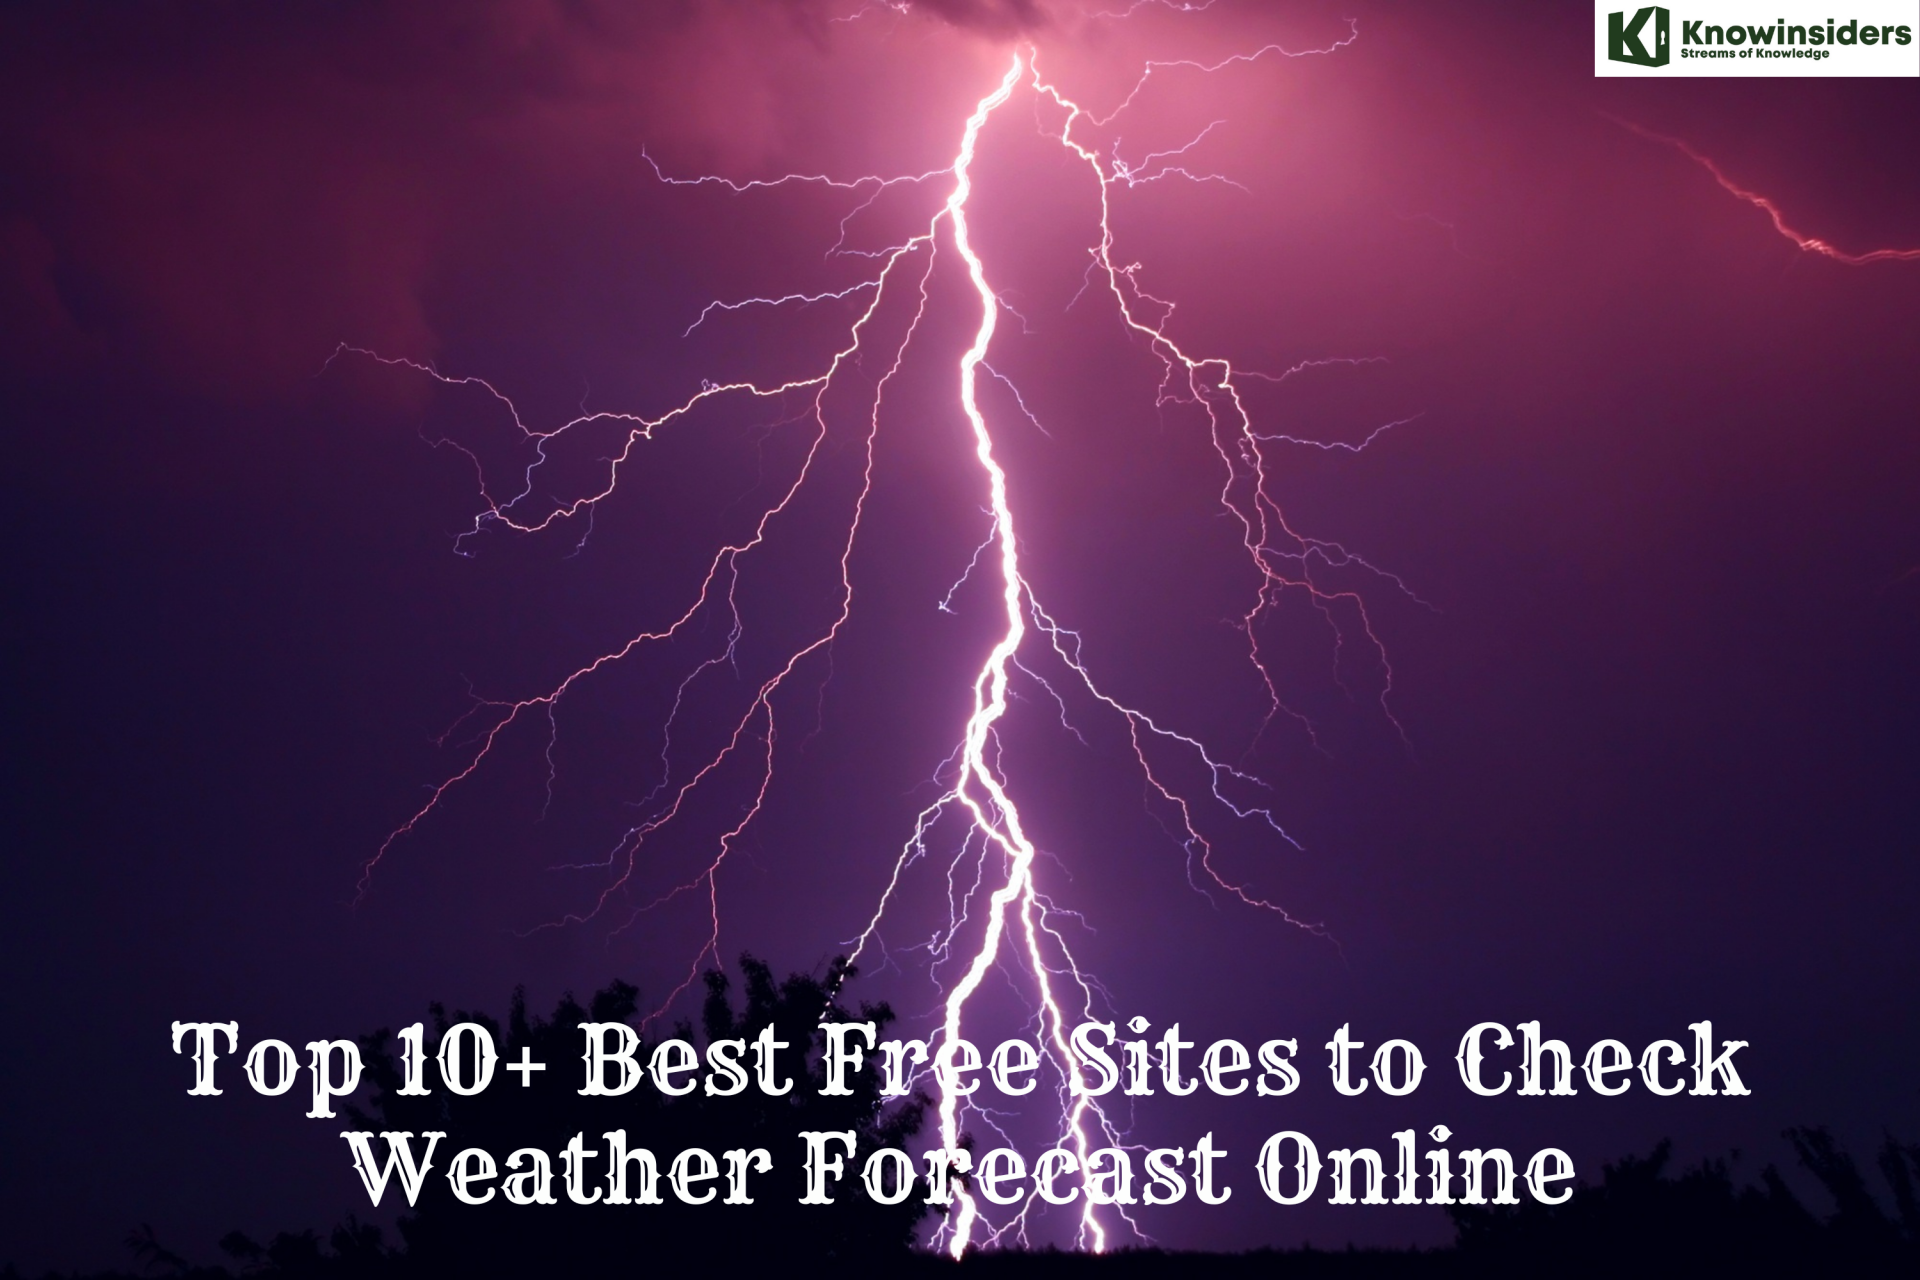 Top 10+ Best Free Sites to Check the U.S Weather Forecast Online